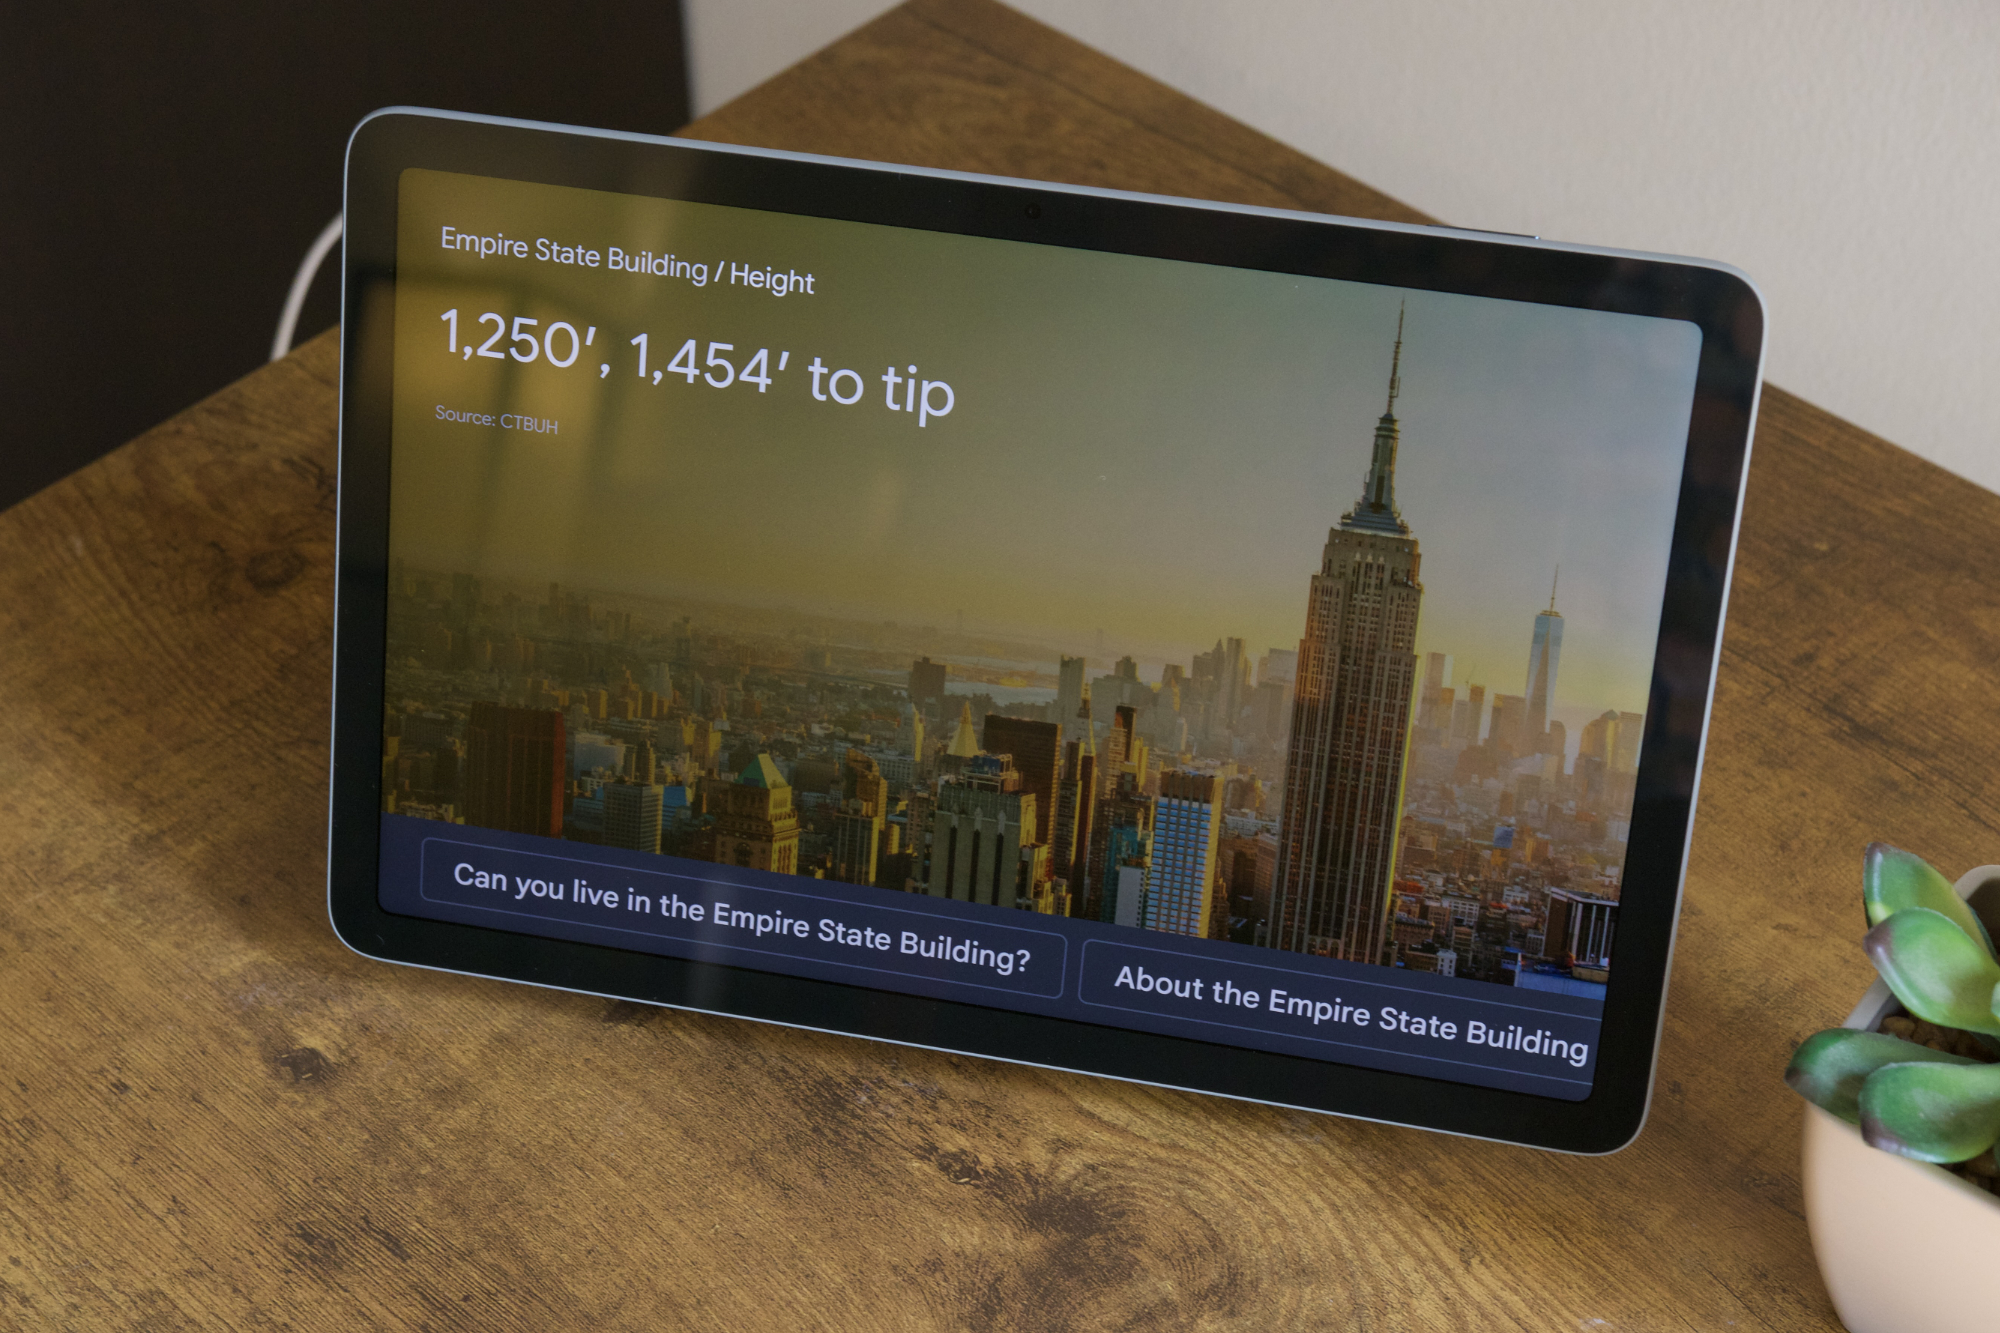 The Google Pixel Tablet showing the height of the Empire State Building.